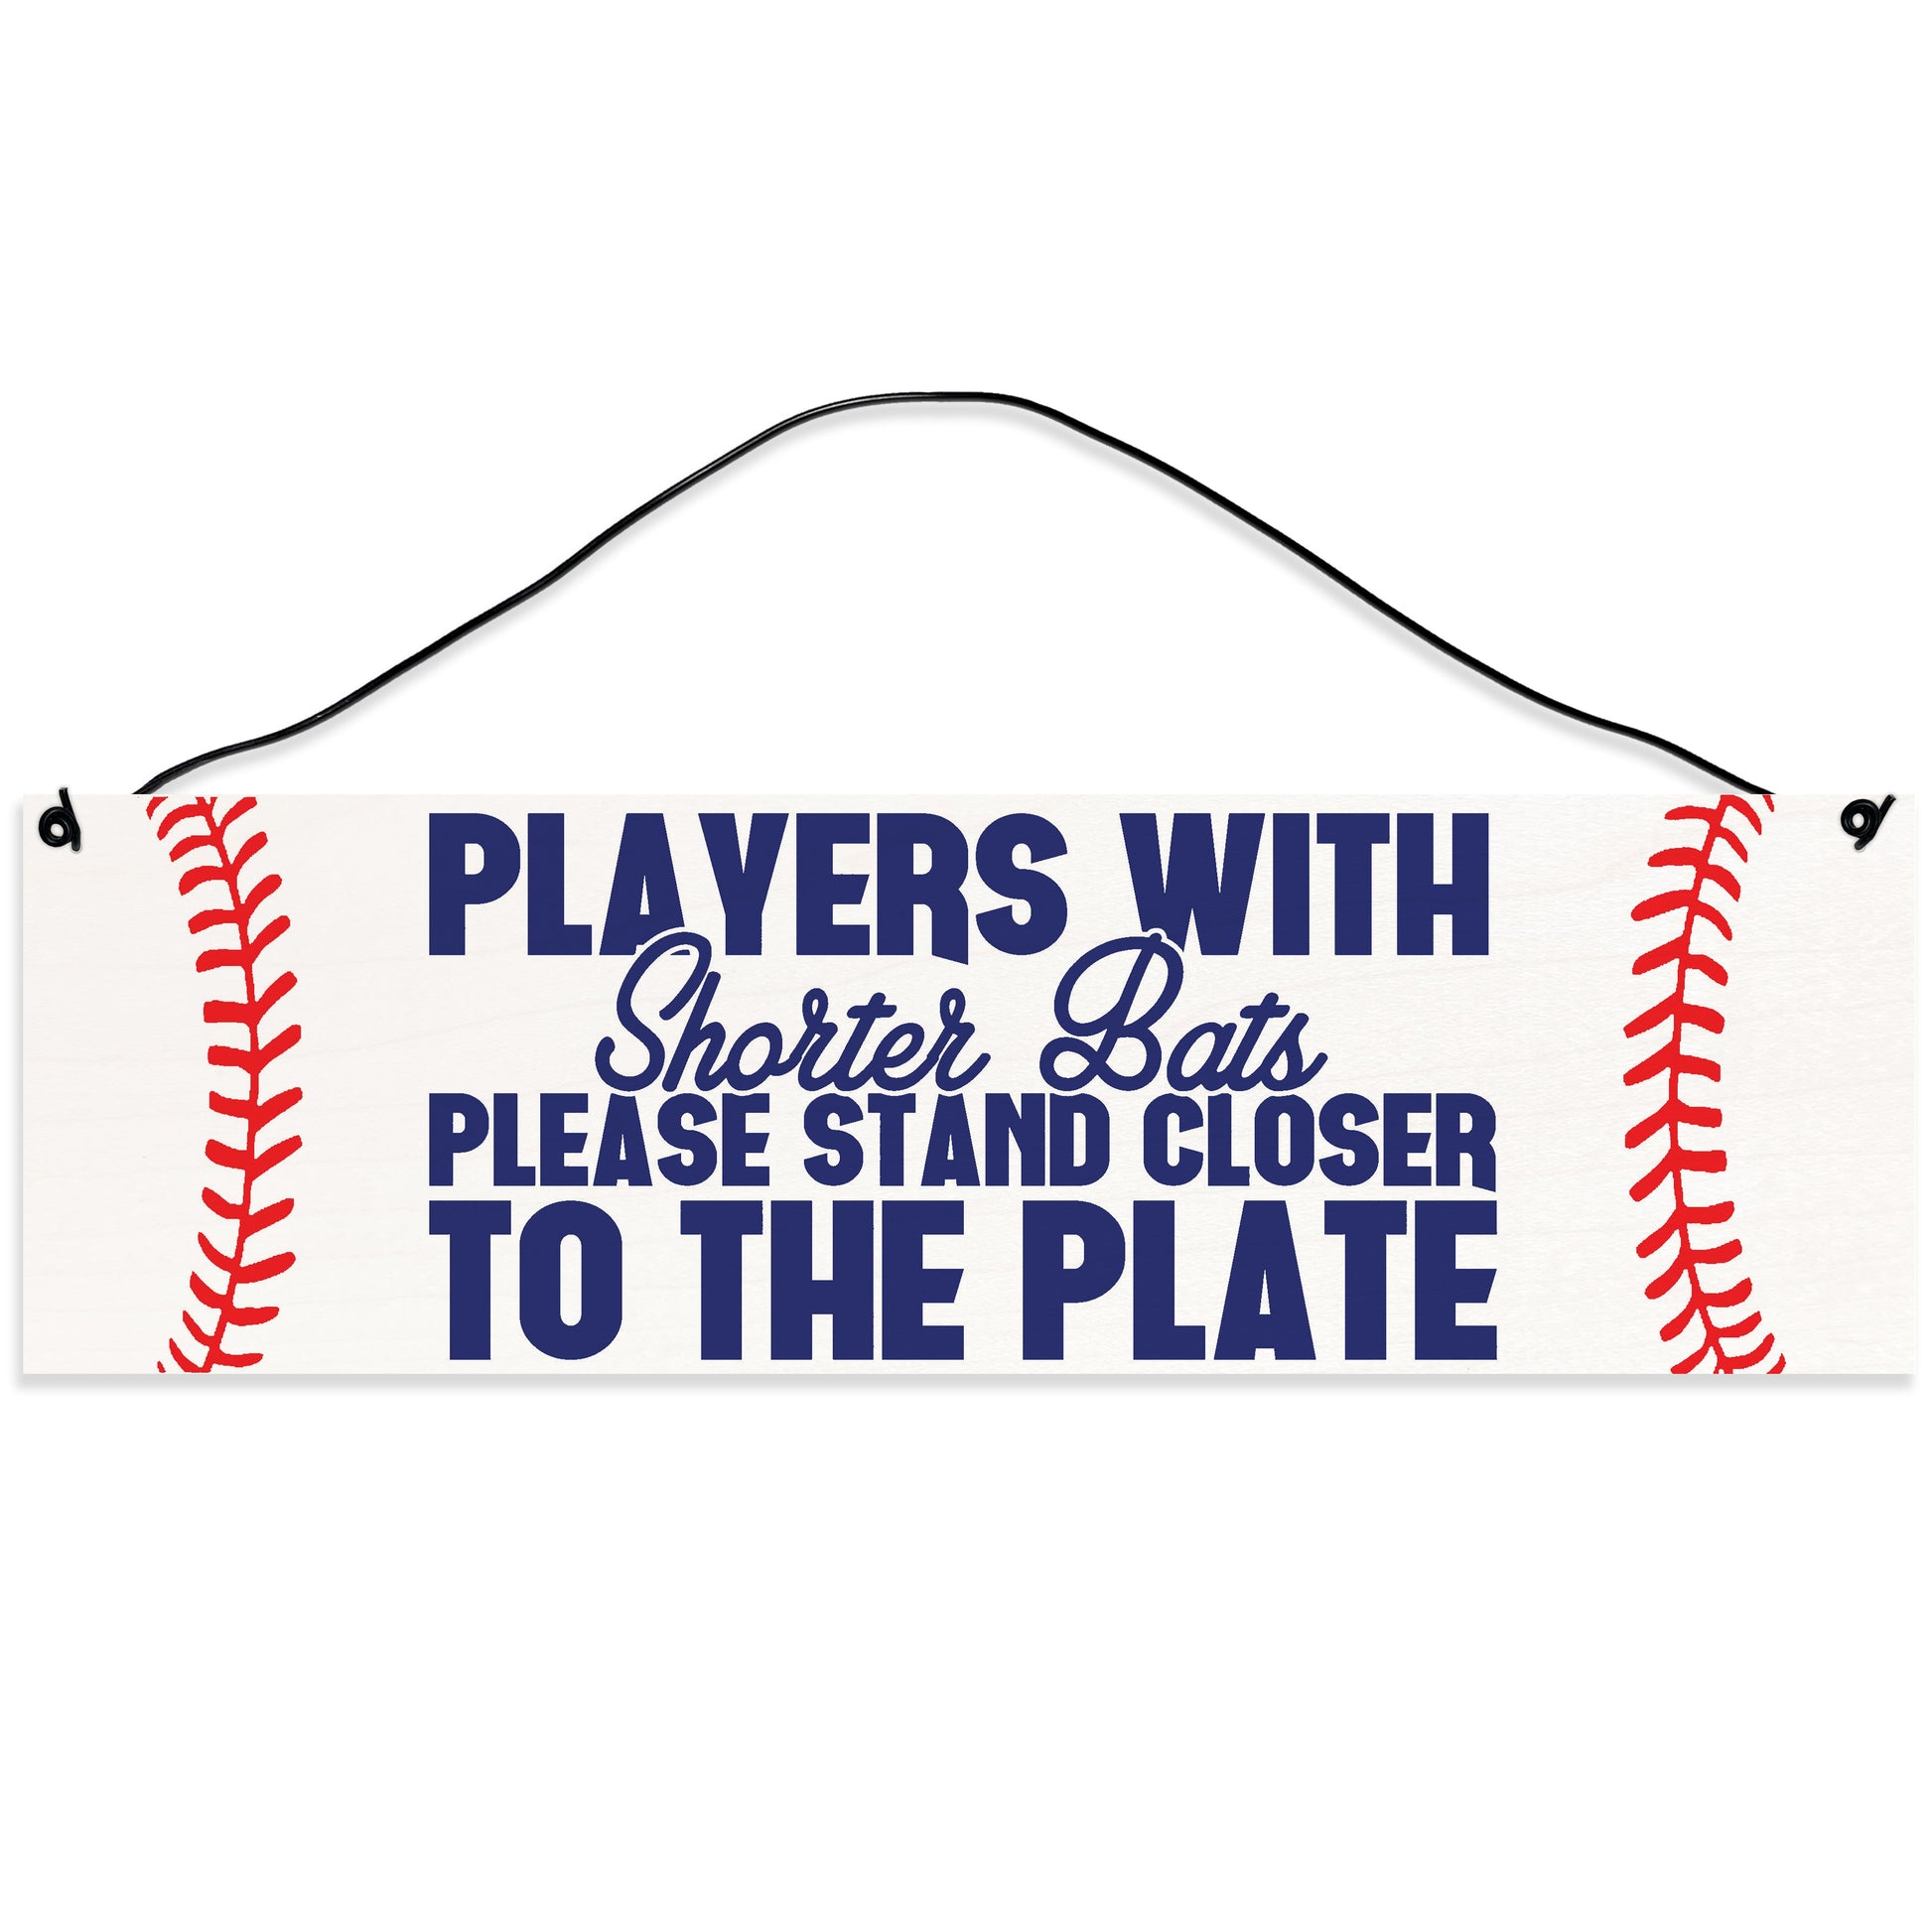 Sawyer's Mill - Players with Shorter Bats Please Stand Closer to The Plate. Wood Sign for Home or Office. Measures 3x10 inches.